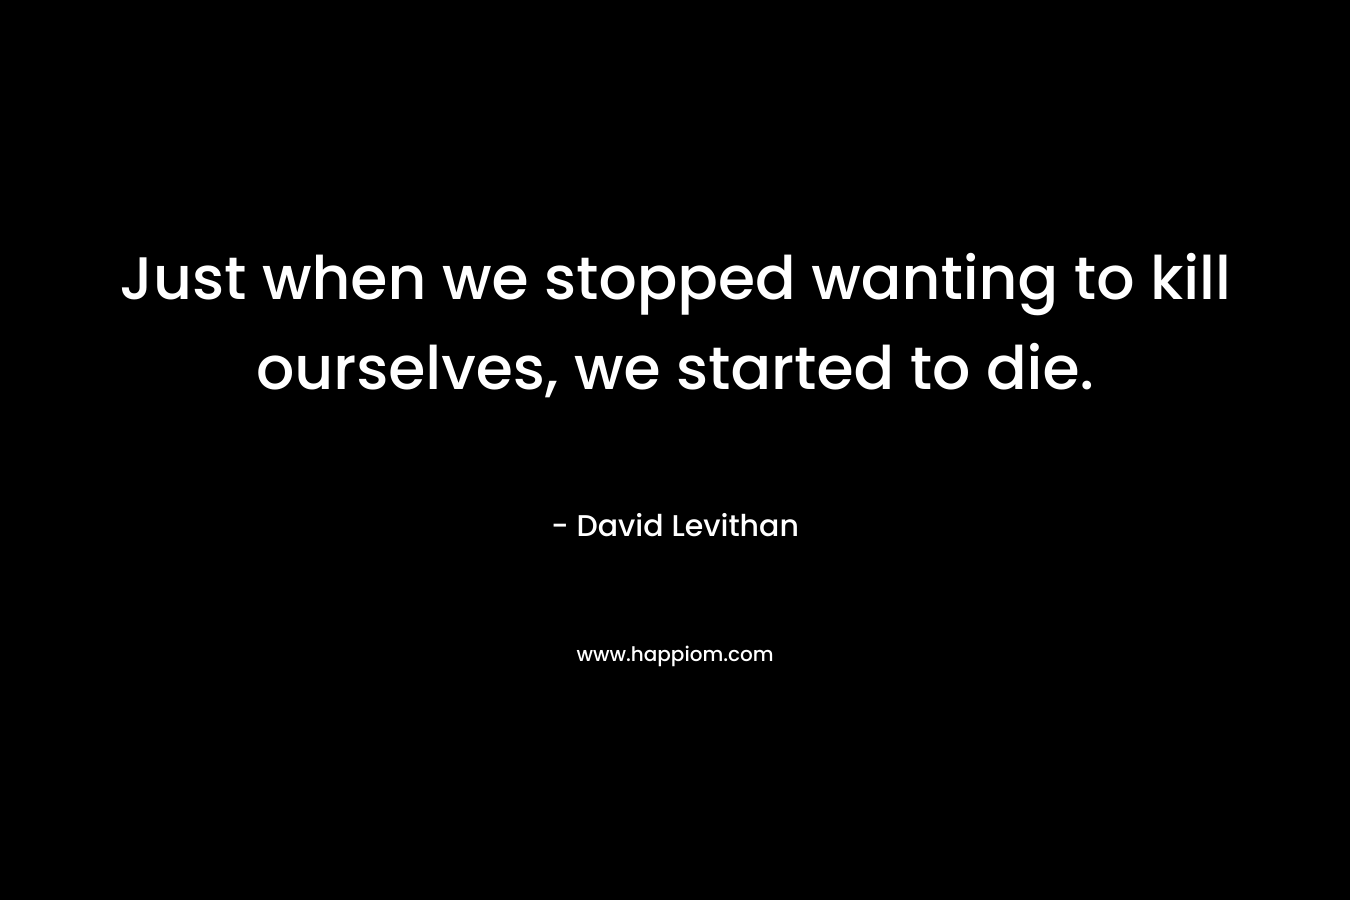 Just when we stopped wanting to kill ourselves, we started to die. – David Levithan